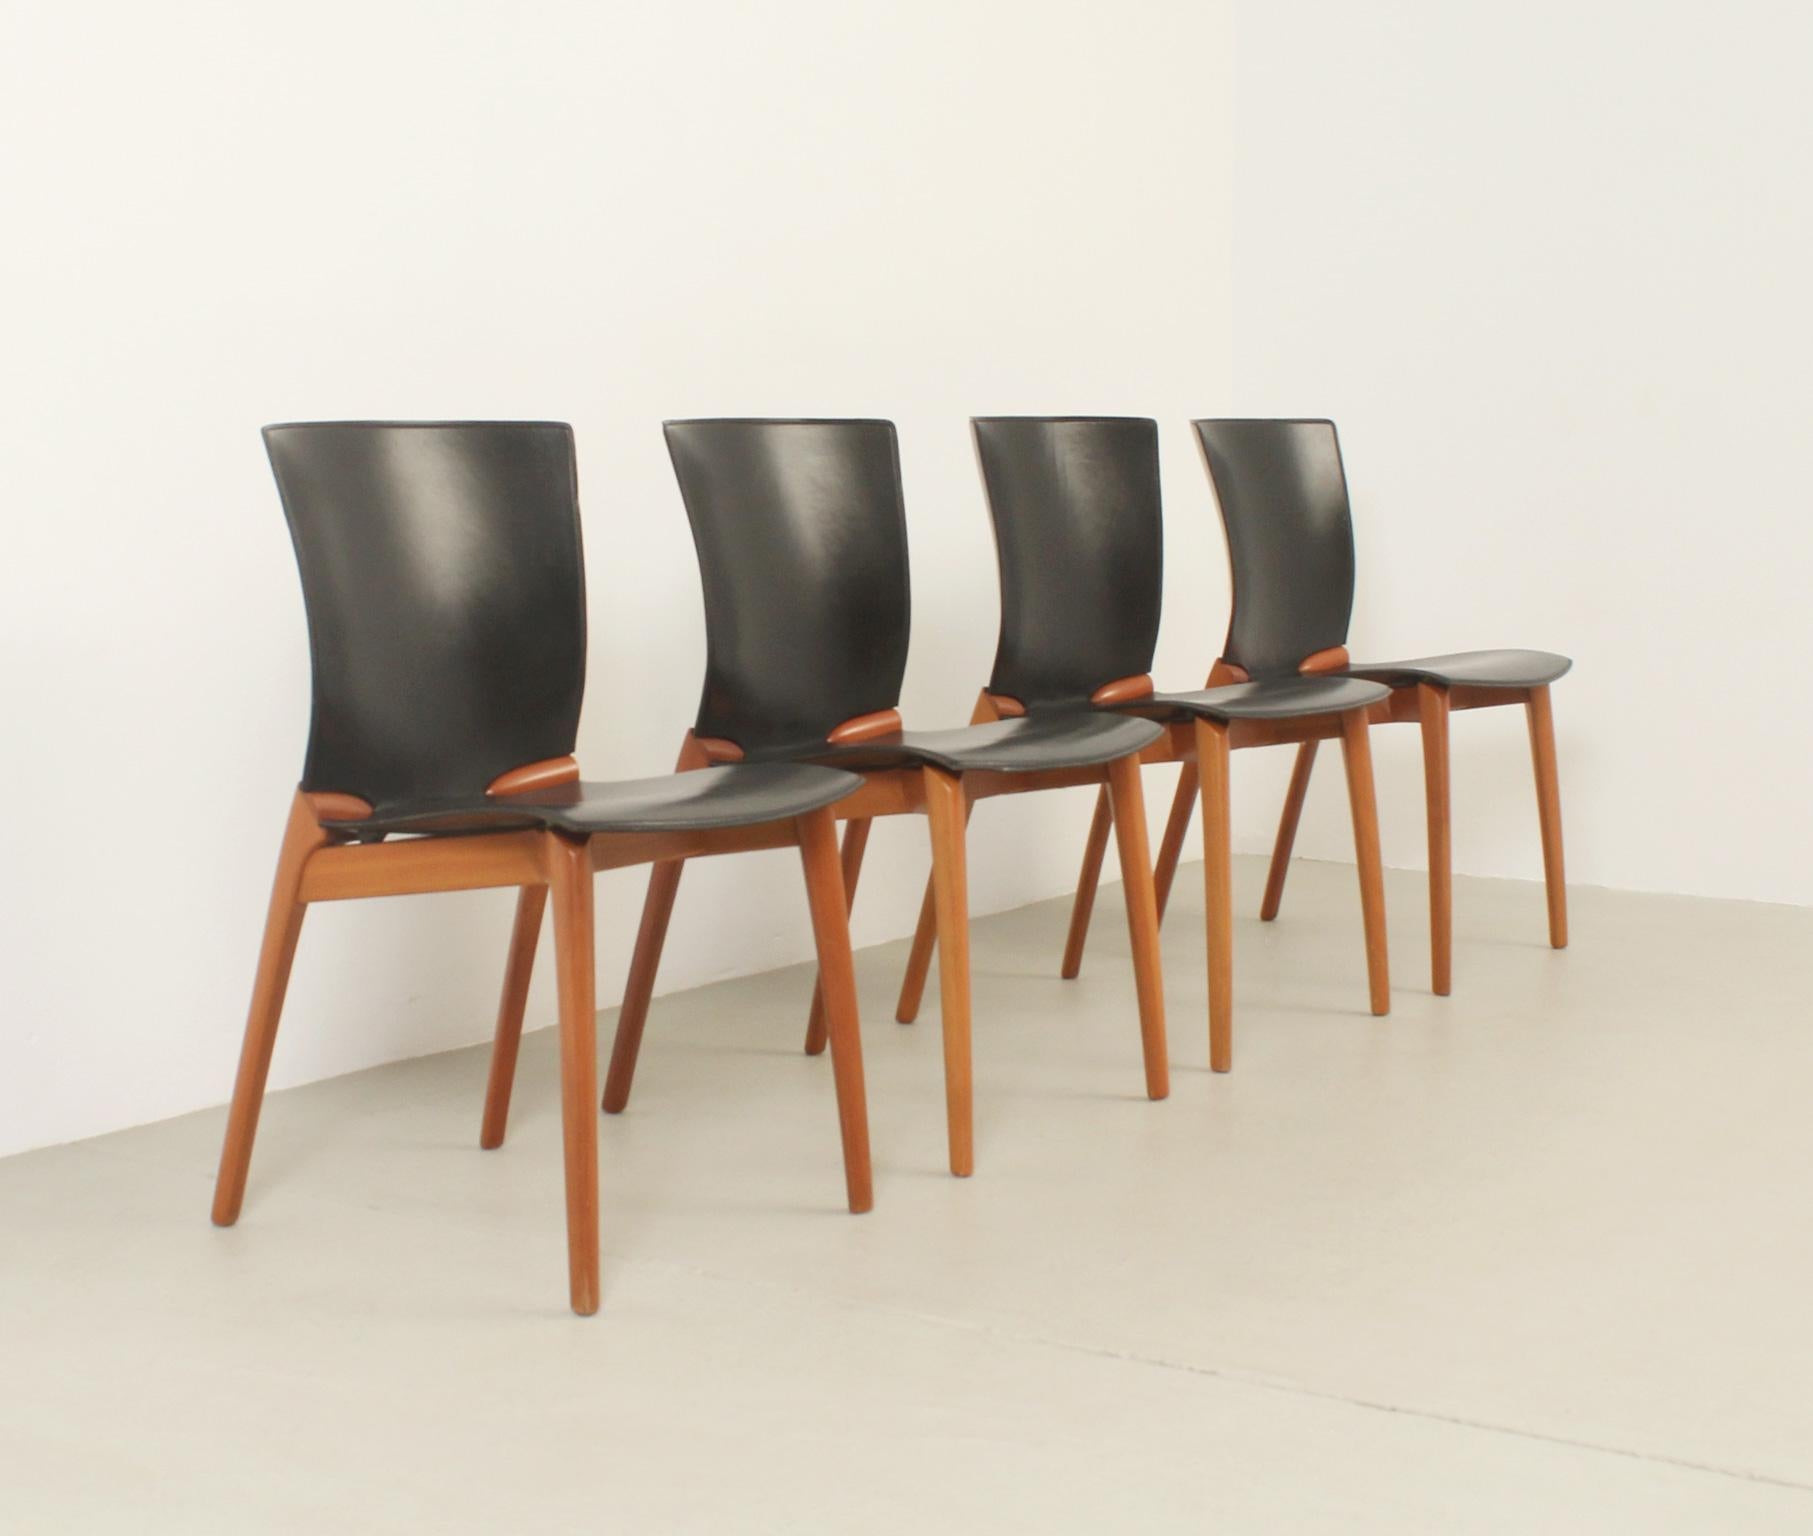 Set of four Cos chairs designed in 1994 by Spanish designer Josep Lluscà for Cassina, Italy. Cherry wood structure and black leather. Signed with Cassina label.